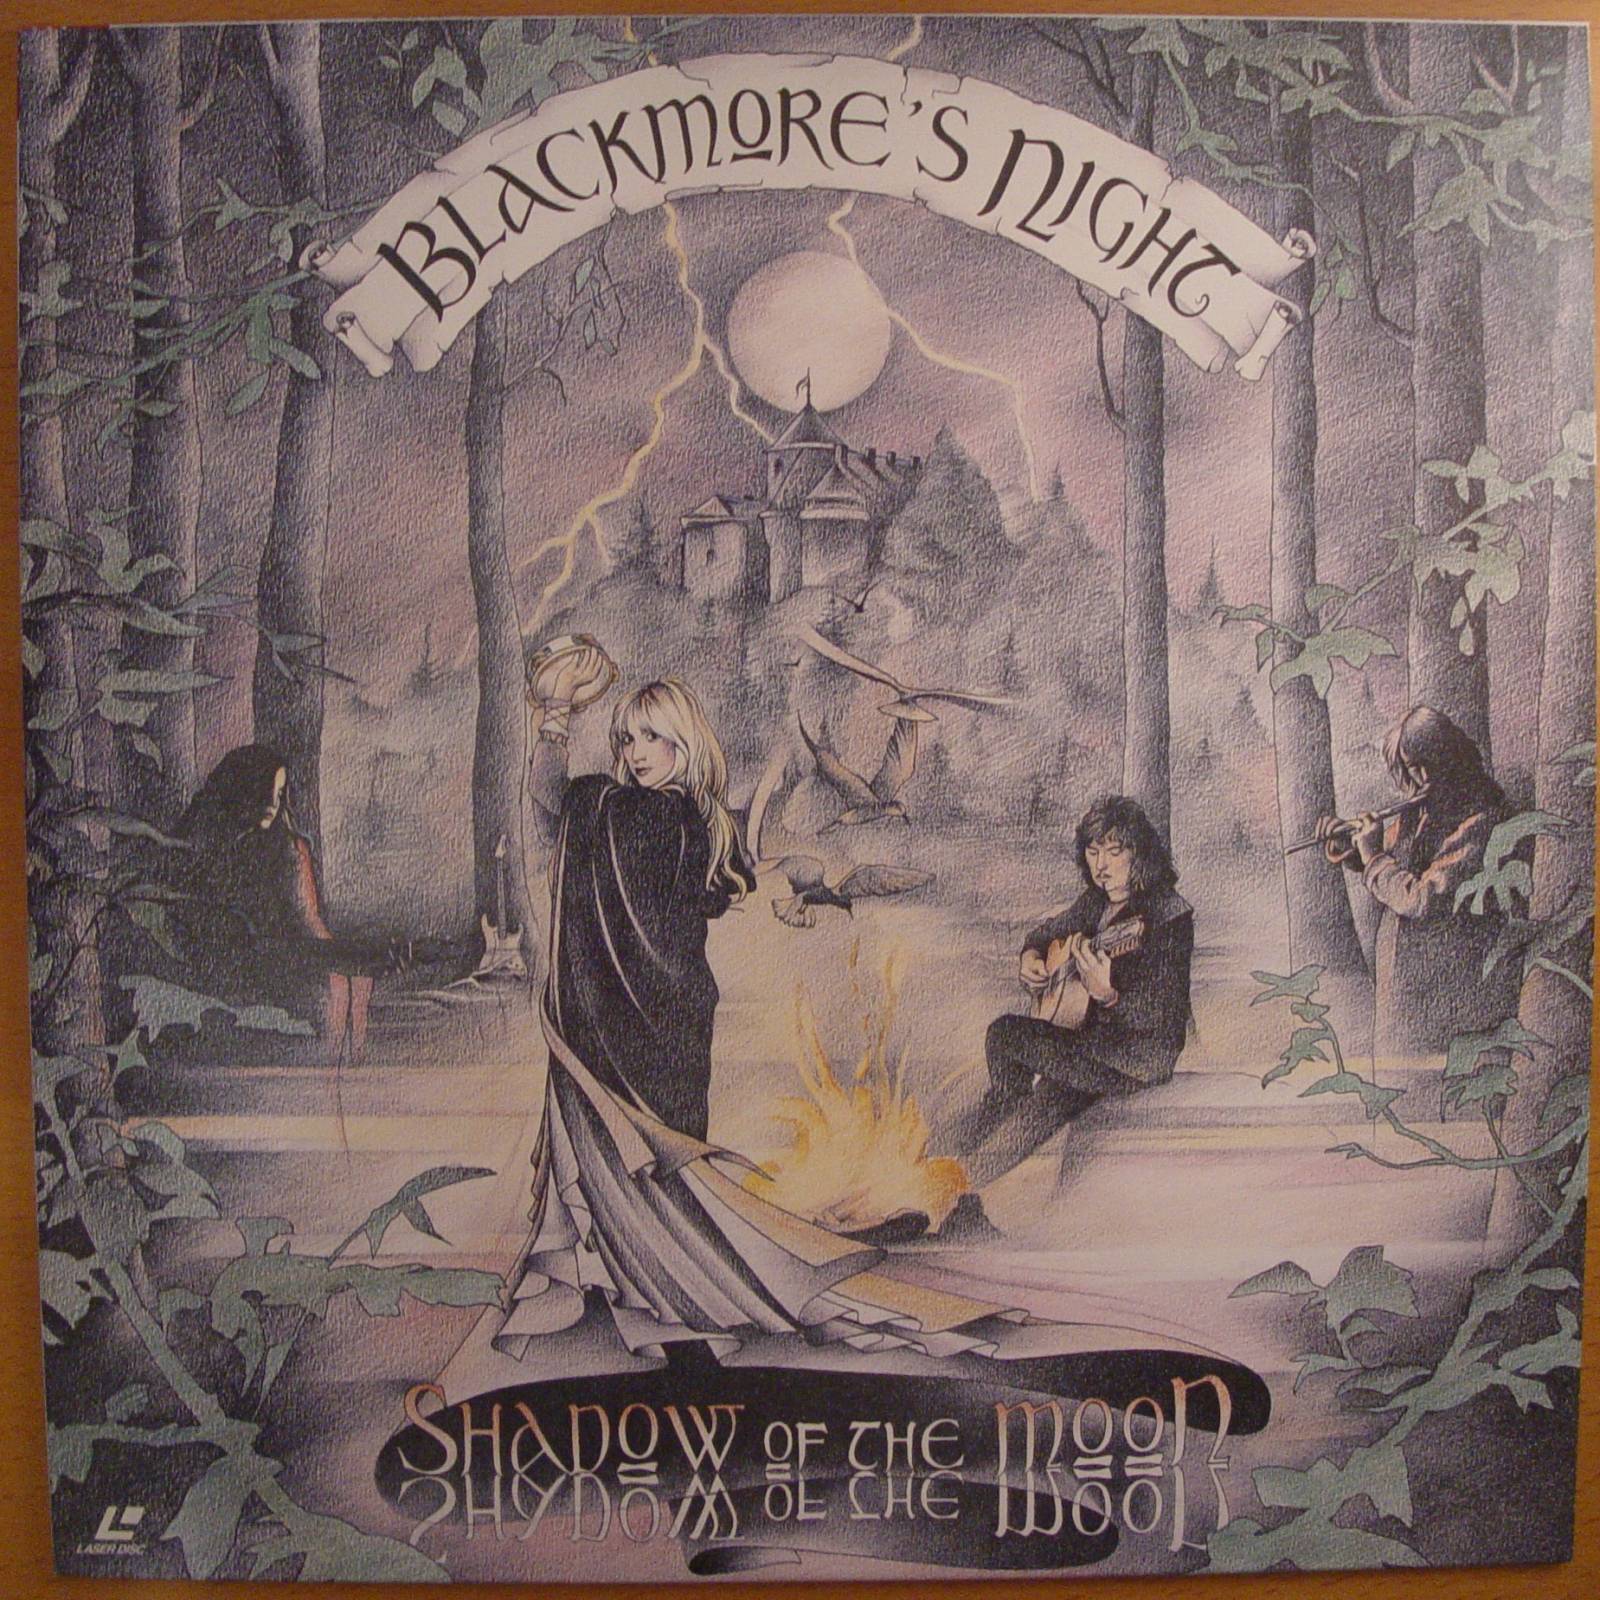 Blackmores night shadow of the moon. Группа Blackmore’s Night. Blackmore's Night Shadow of the Moon 1997. Blackmore's Night обложки альбомов. Blackmore's Night логотип.